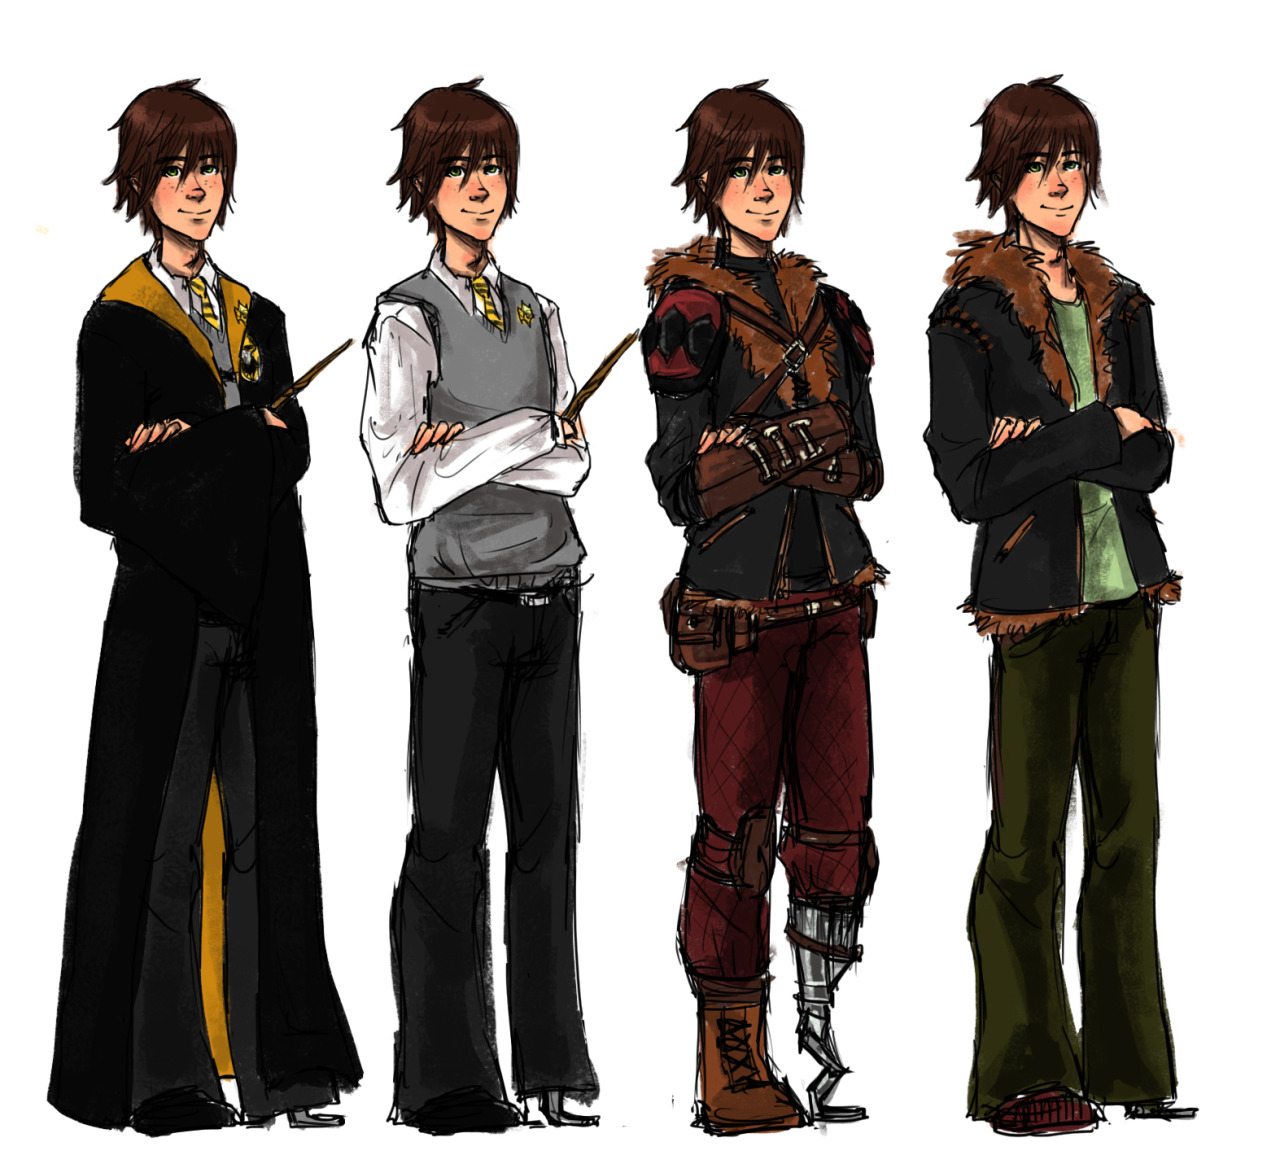 zee-art-fart:   someone requested all of the outfits in one post. The first one shows